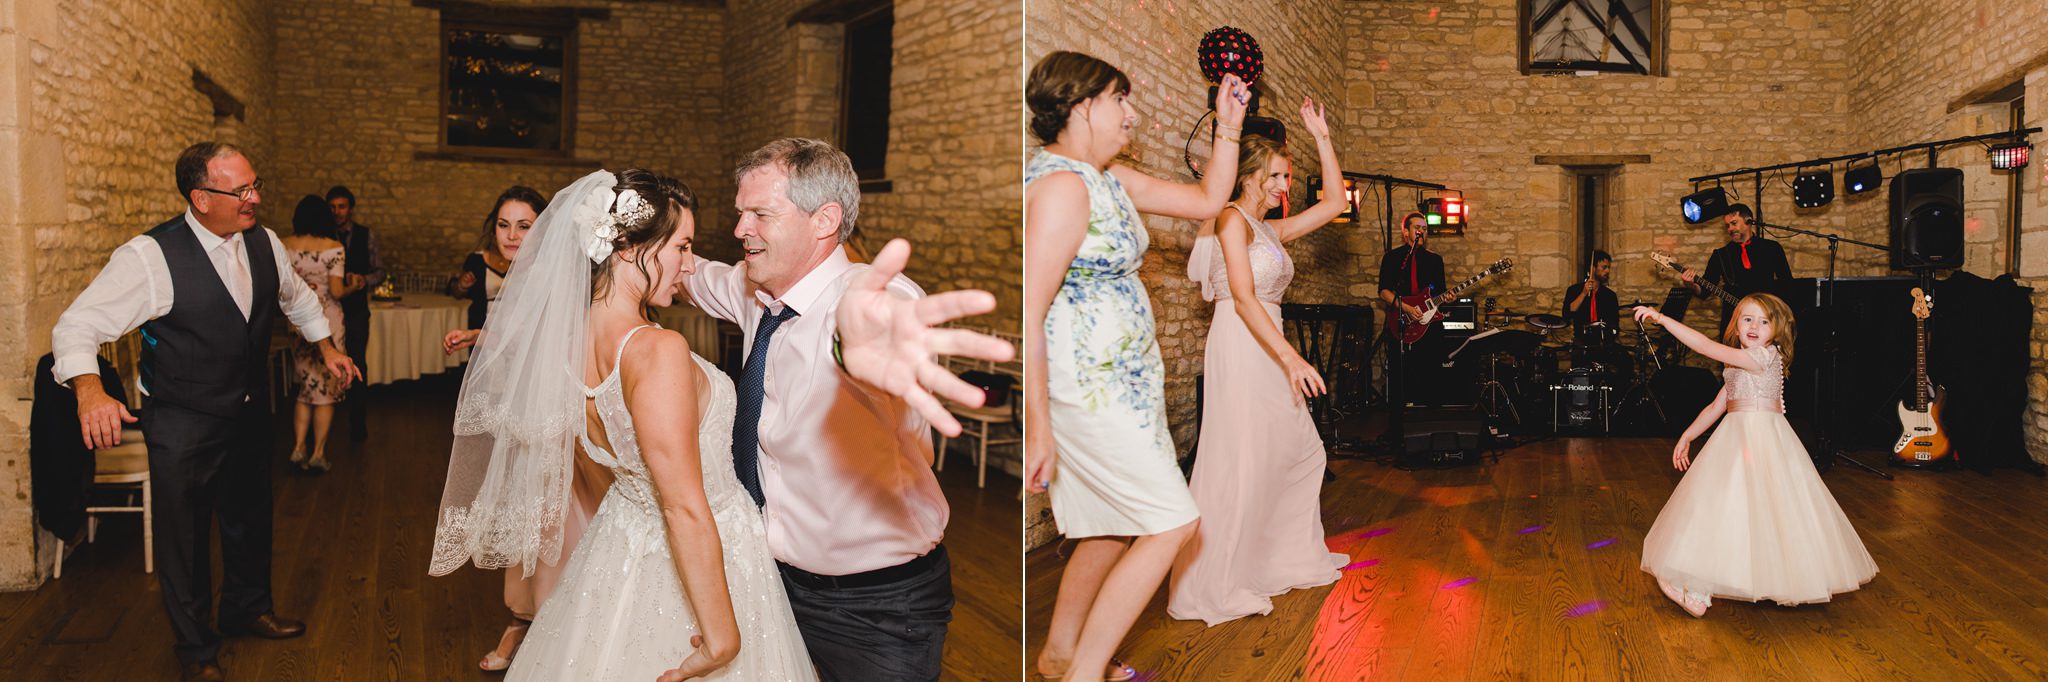 Wedding guests partying on the dance floor at Upcote 